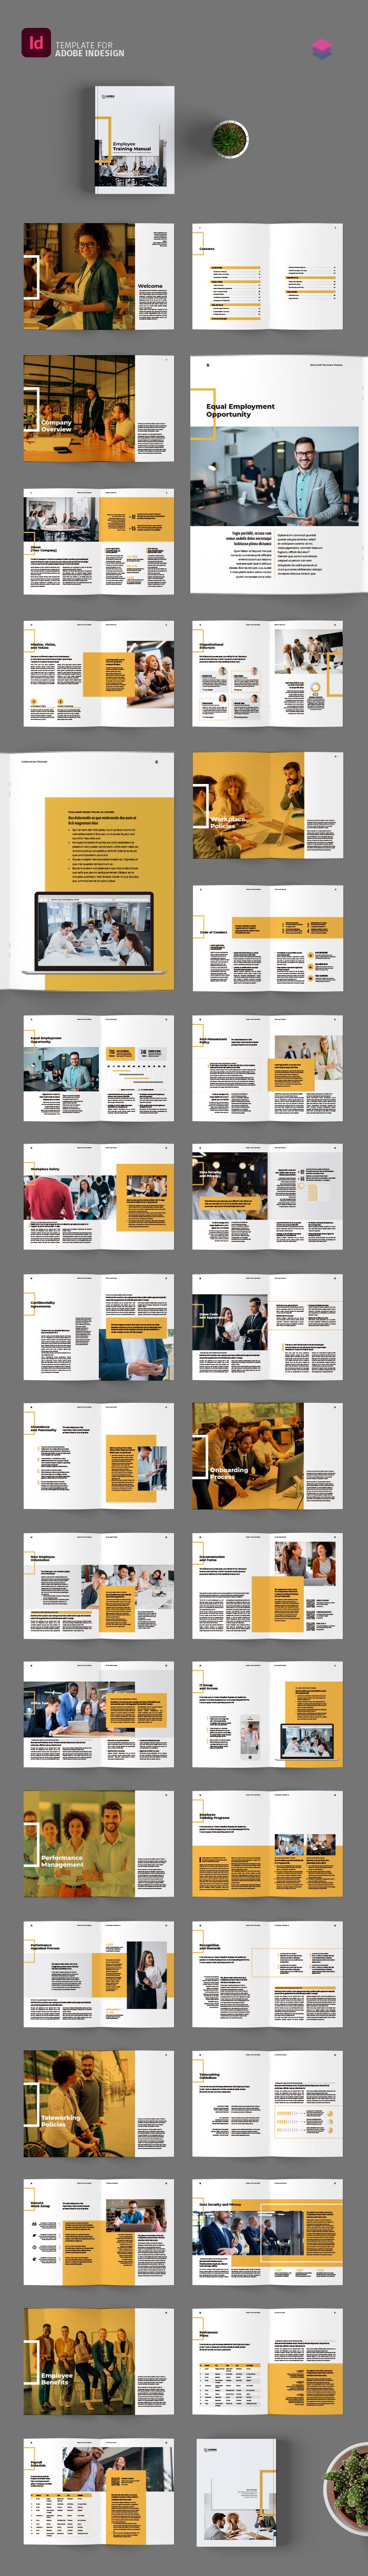 InDesign Template for Employee Training Manual